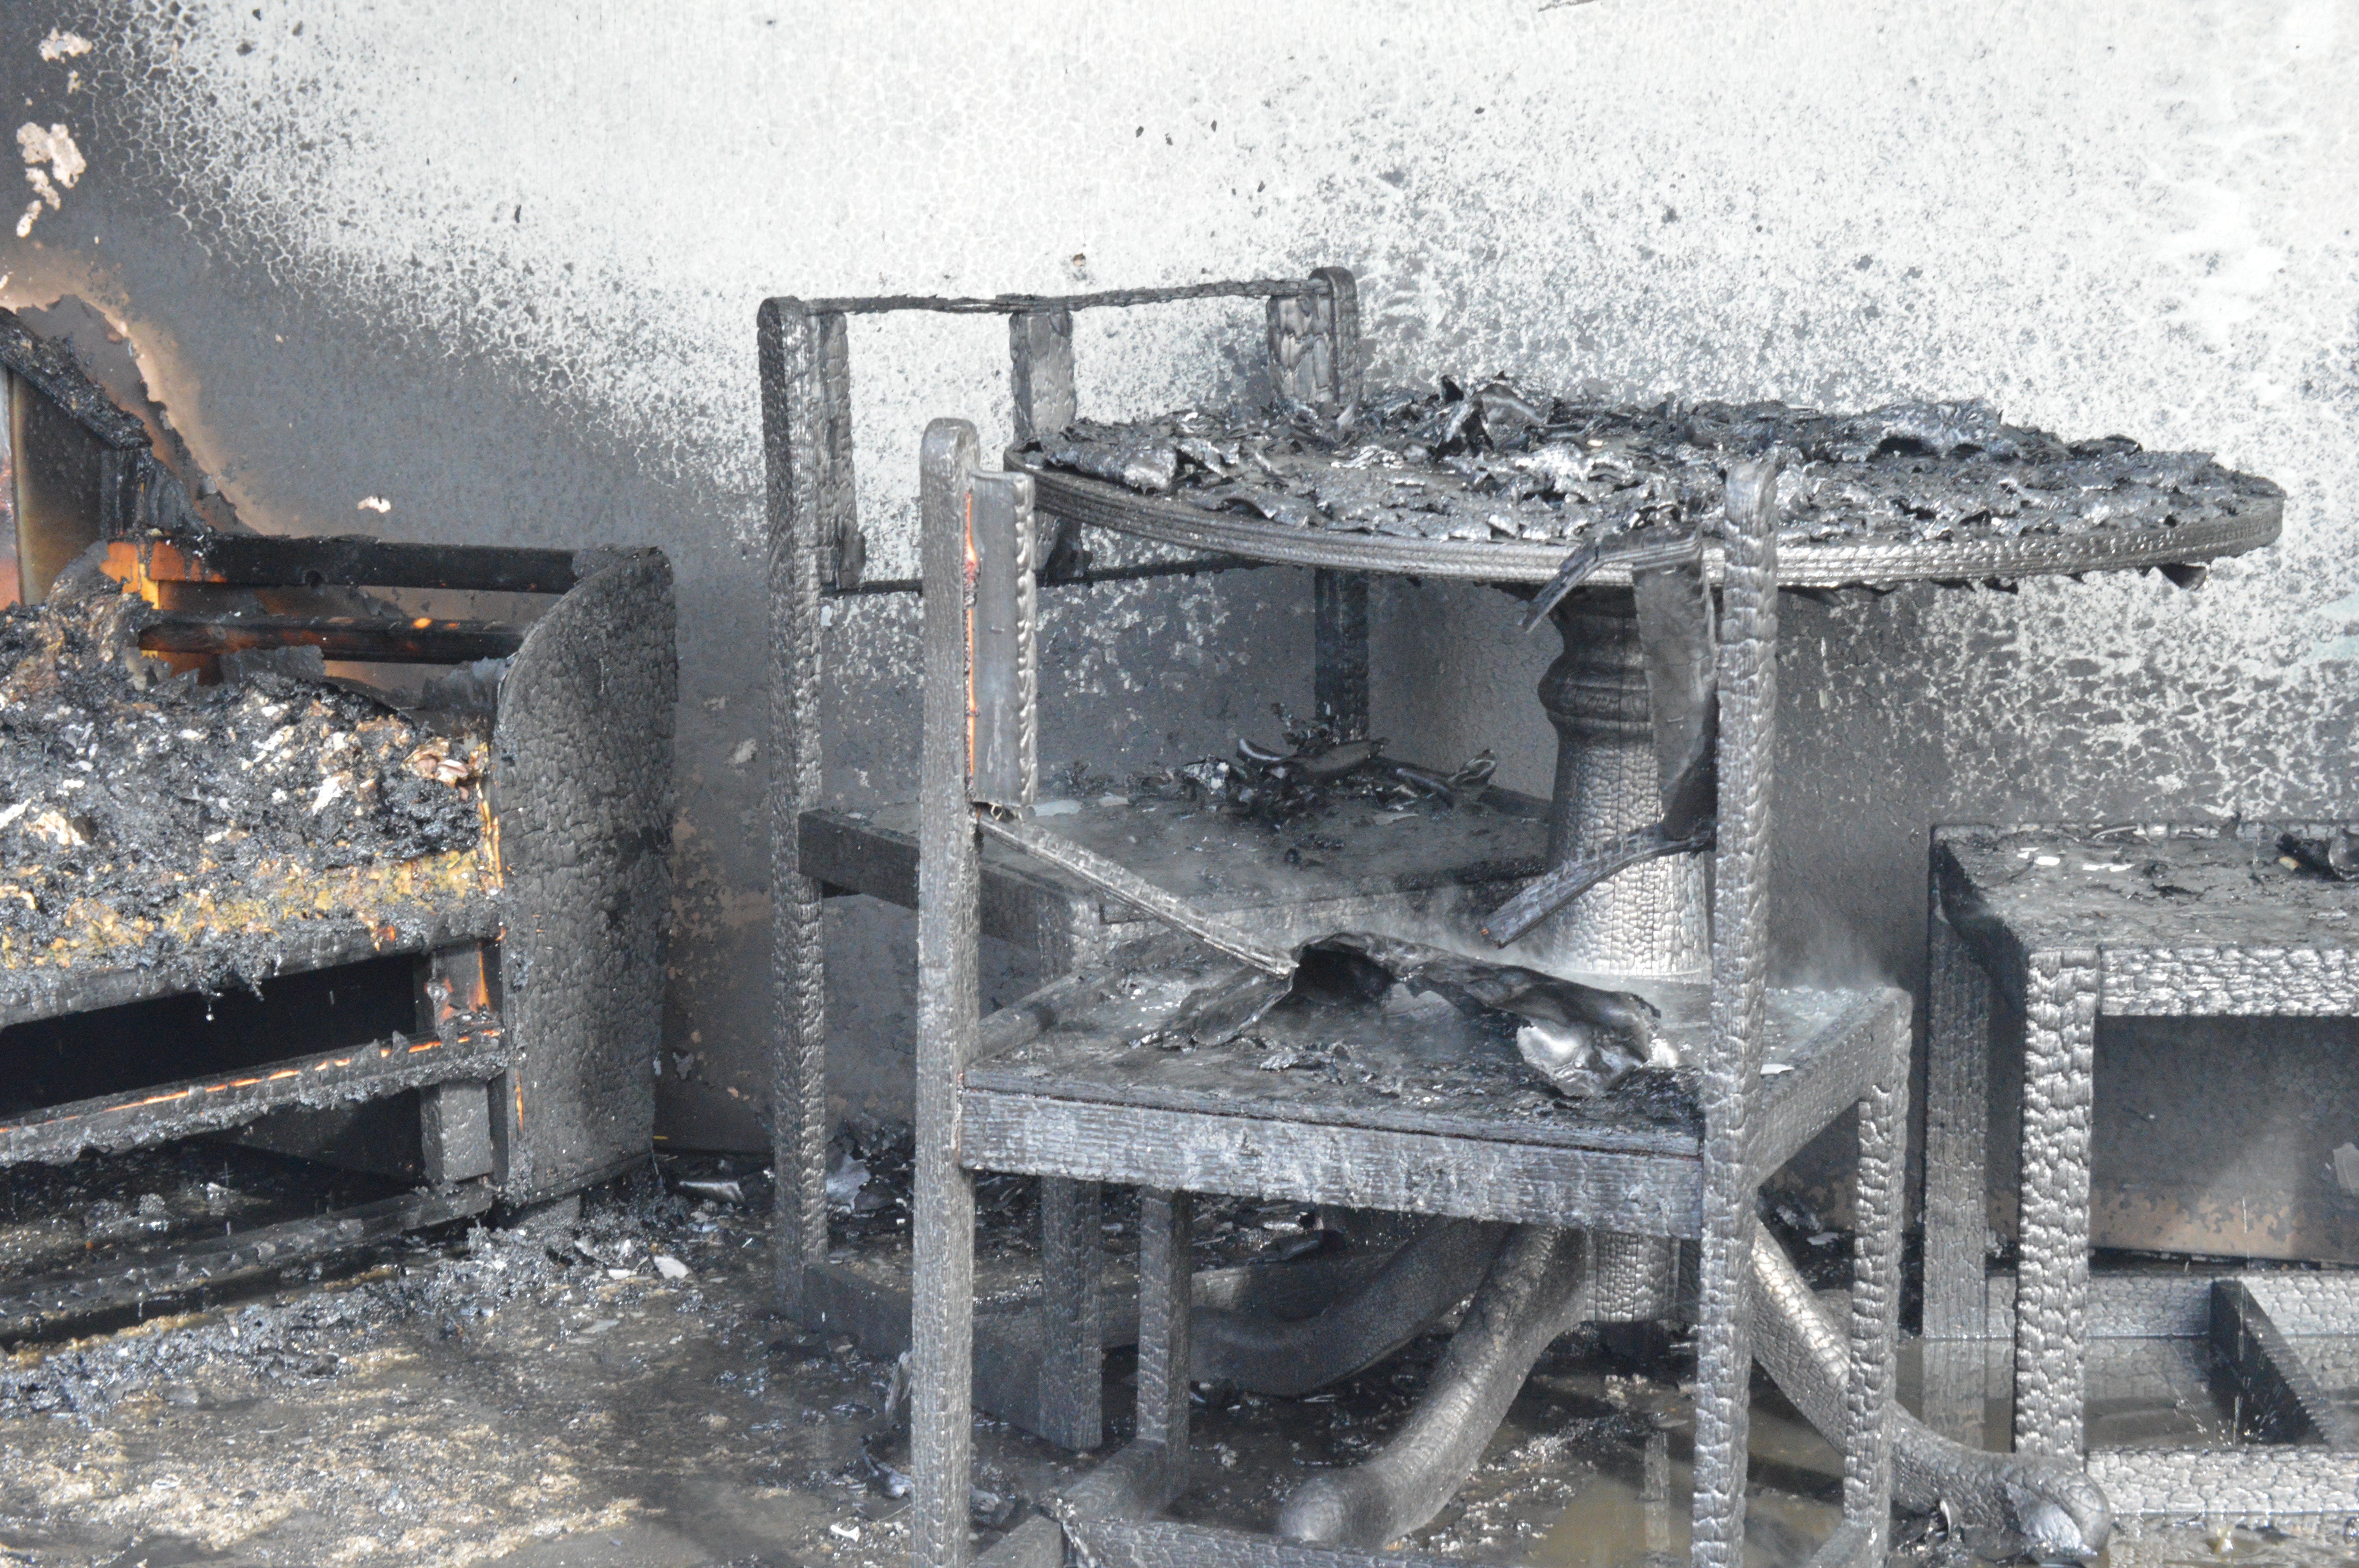 Fire Department, ATF conduct arson investigation training